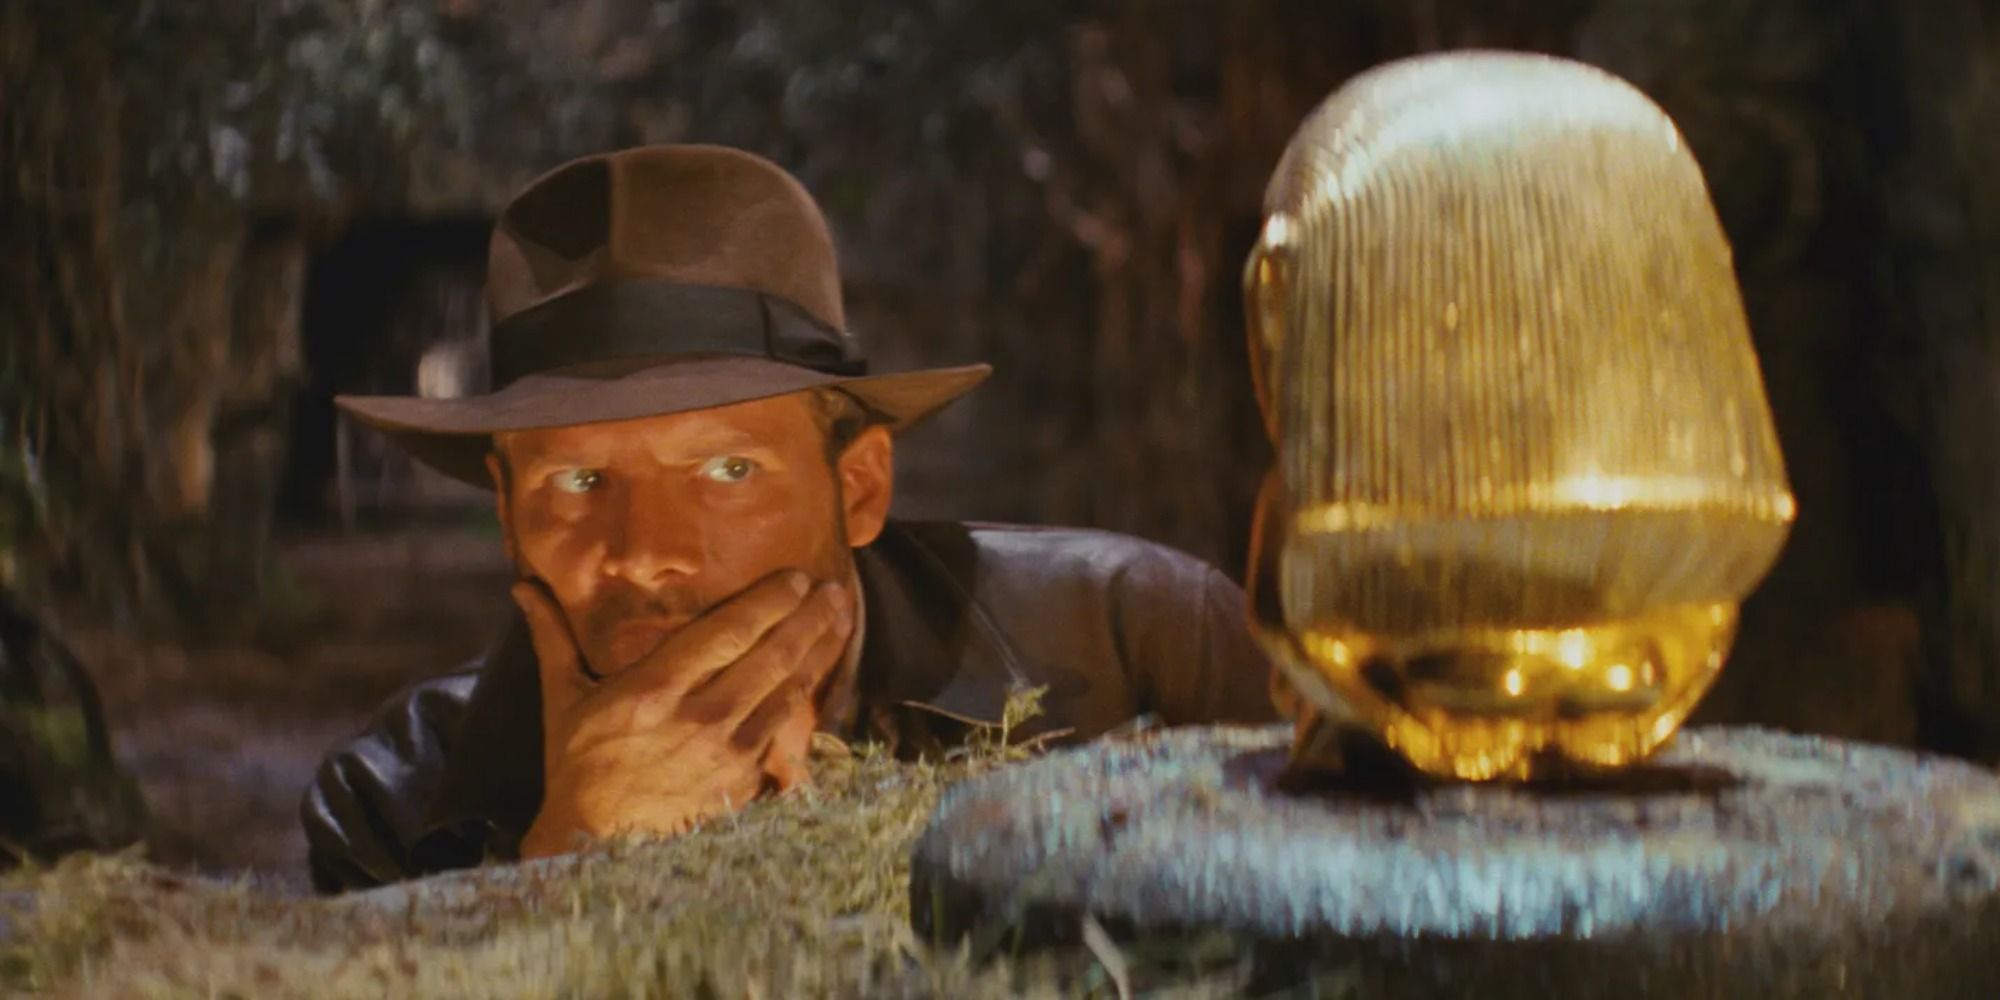 Harrison Ford as Indiana Jones staring at the artifact 